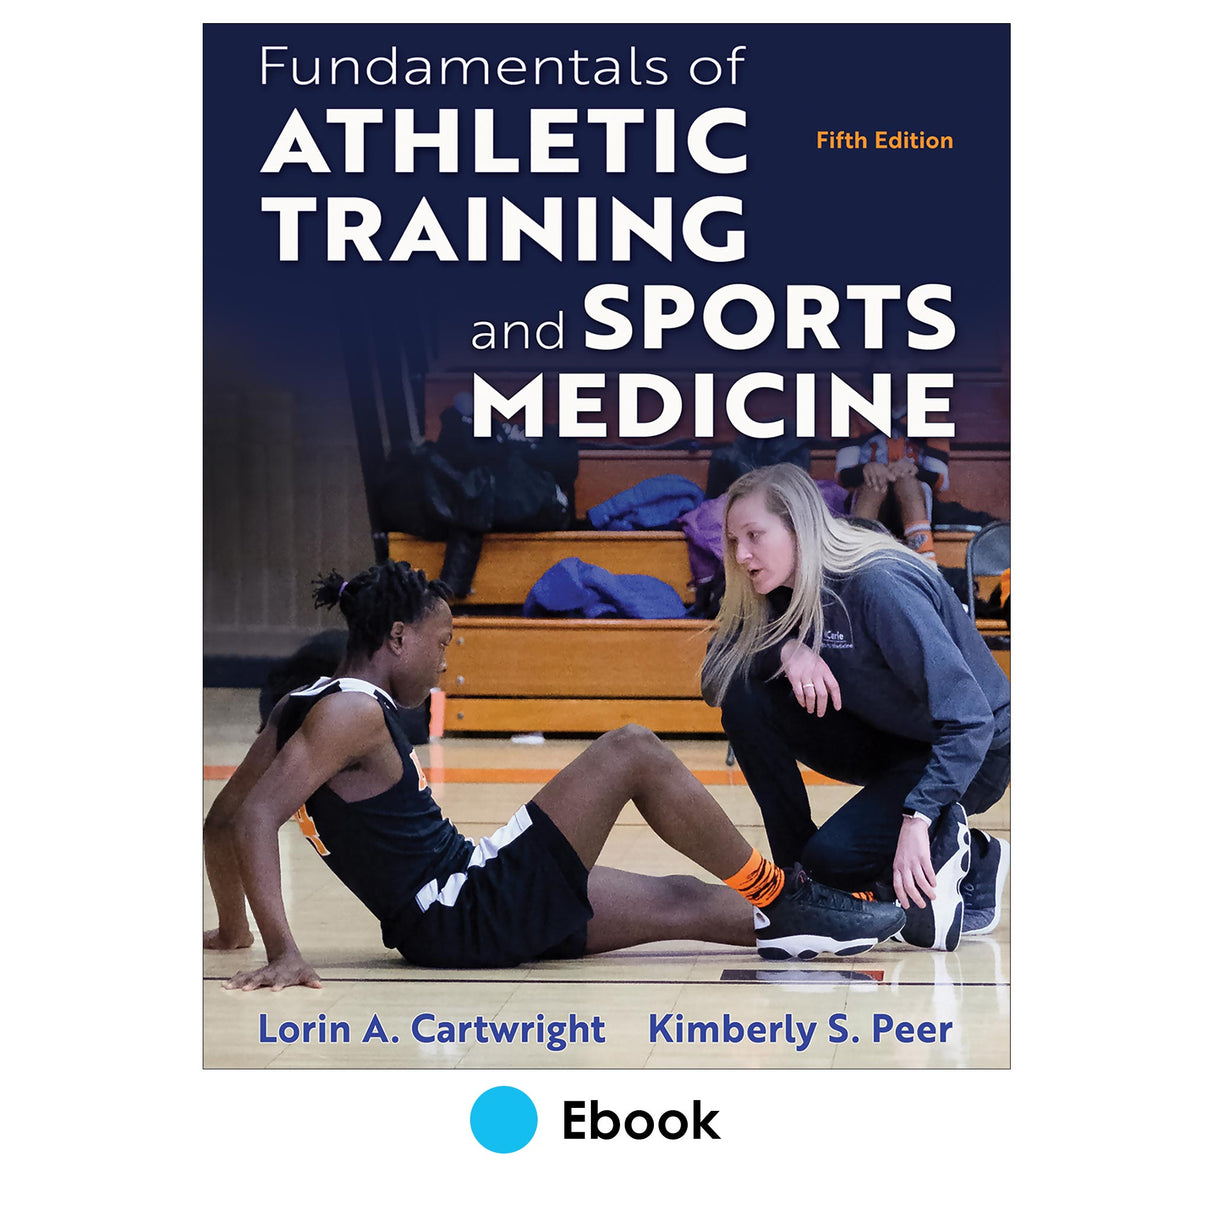 Fundamentals of Athletic Training and Sports Medicine 5th Edition epub With Web Resource